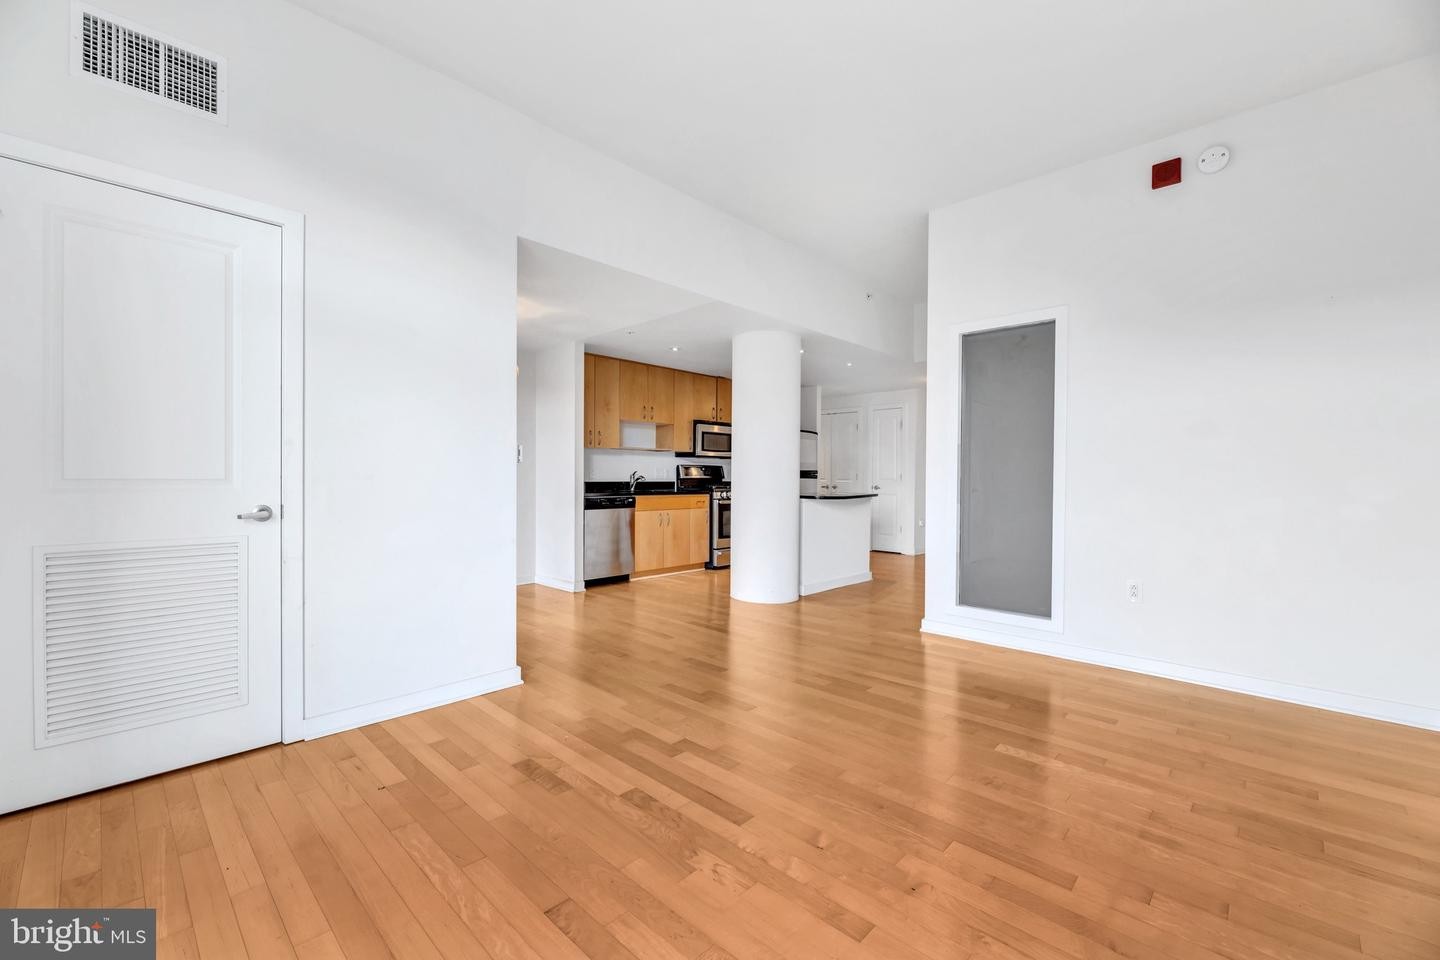 5. 475 K St NW 